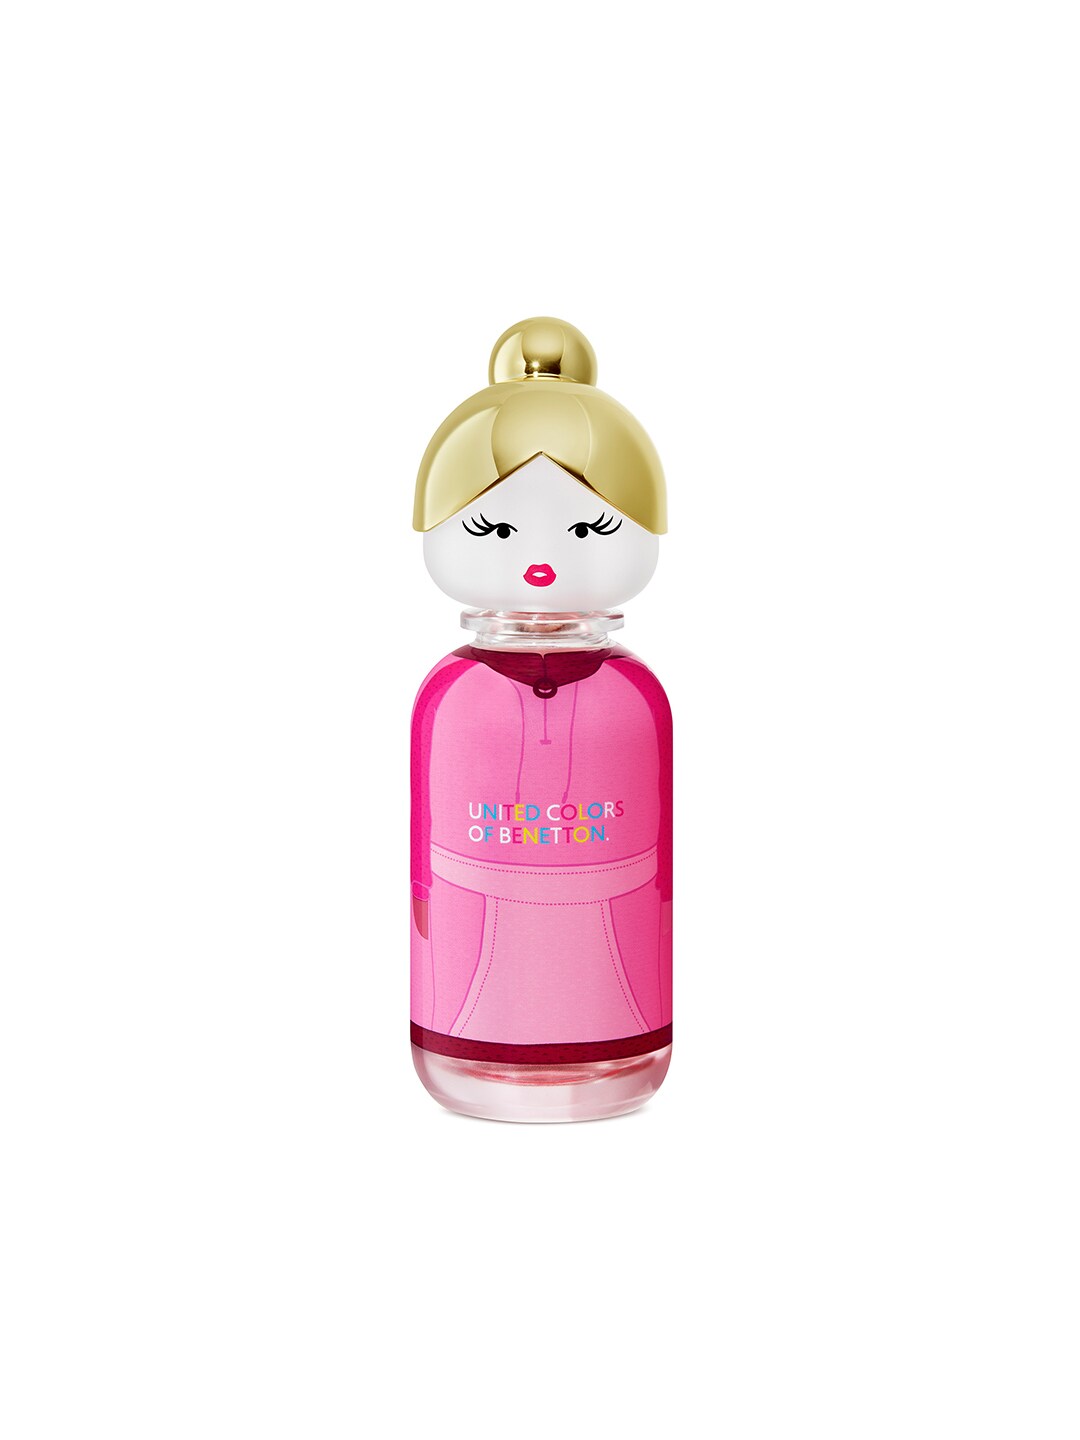 United Colors Of Benetton Sisterland Pink Raspberry For Her Eau De Toilette 80Ml Price in India